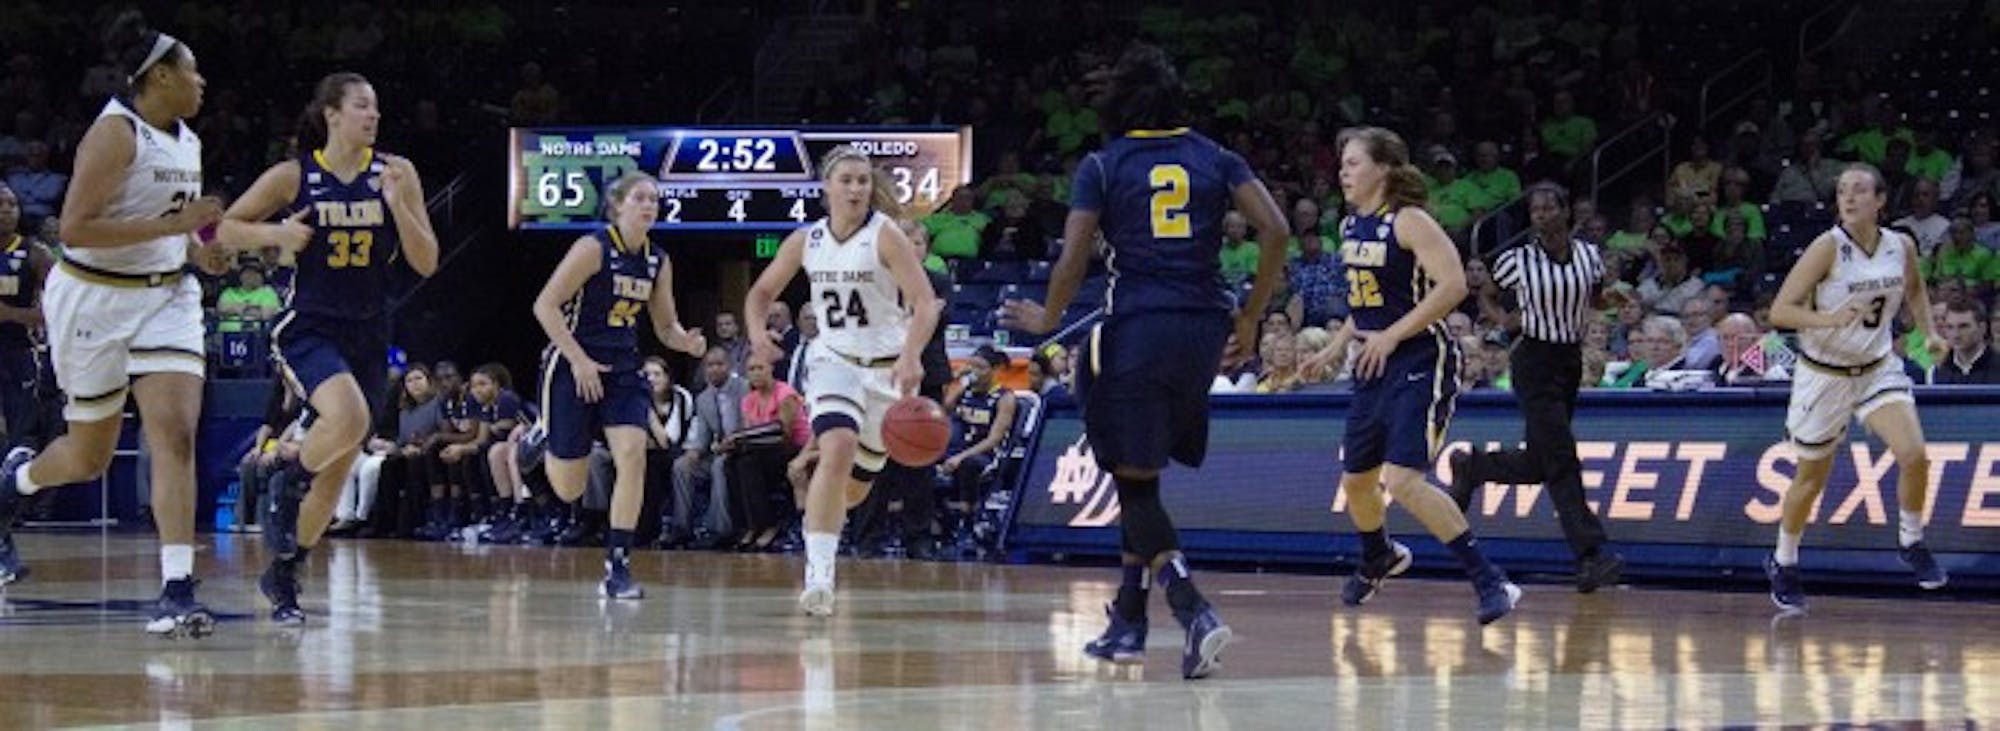 Irish senior guard Hannah Huffman, center, leads a fast break with junior forward Kristina Nelson, left, and freshman guard Marina Mabrey, right, during Notre Dame’s 74-39 win over Toledo on Nov. 18 at Purcell Pavilion. Huffman had a team-high seven rebounds, while Mabrey scored six points and Nelson added four points in the win.